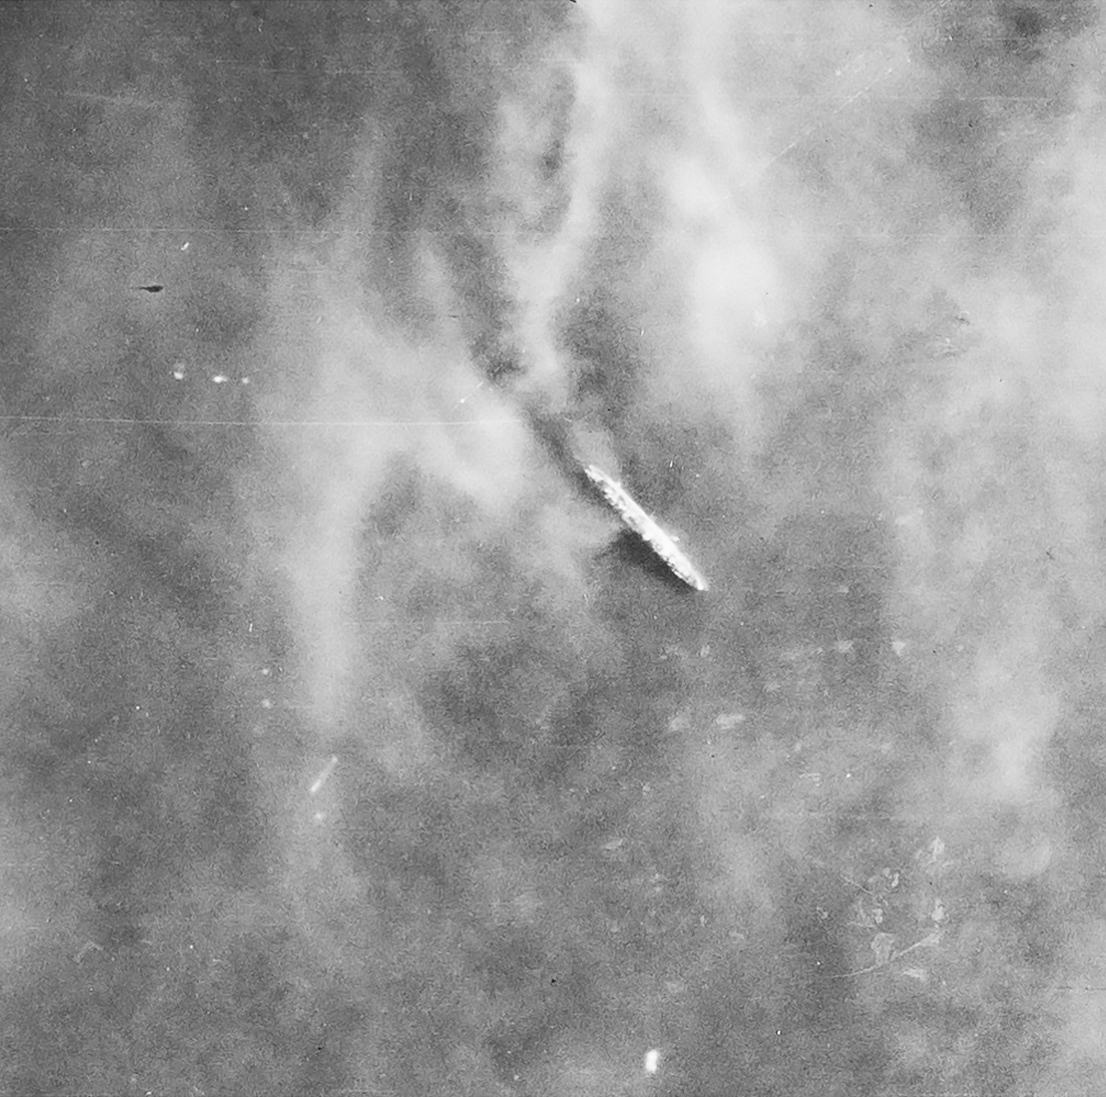 Detail from a black and white vertical aerial photograph, showing a warship at sea. Above the ship, wafts of smoke partly obscure the view.